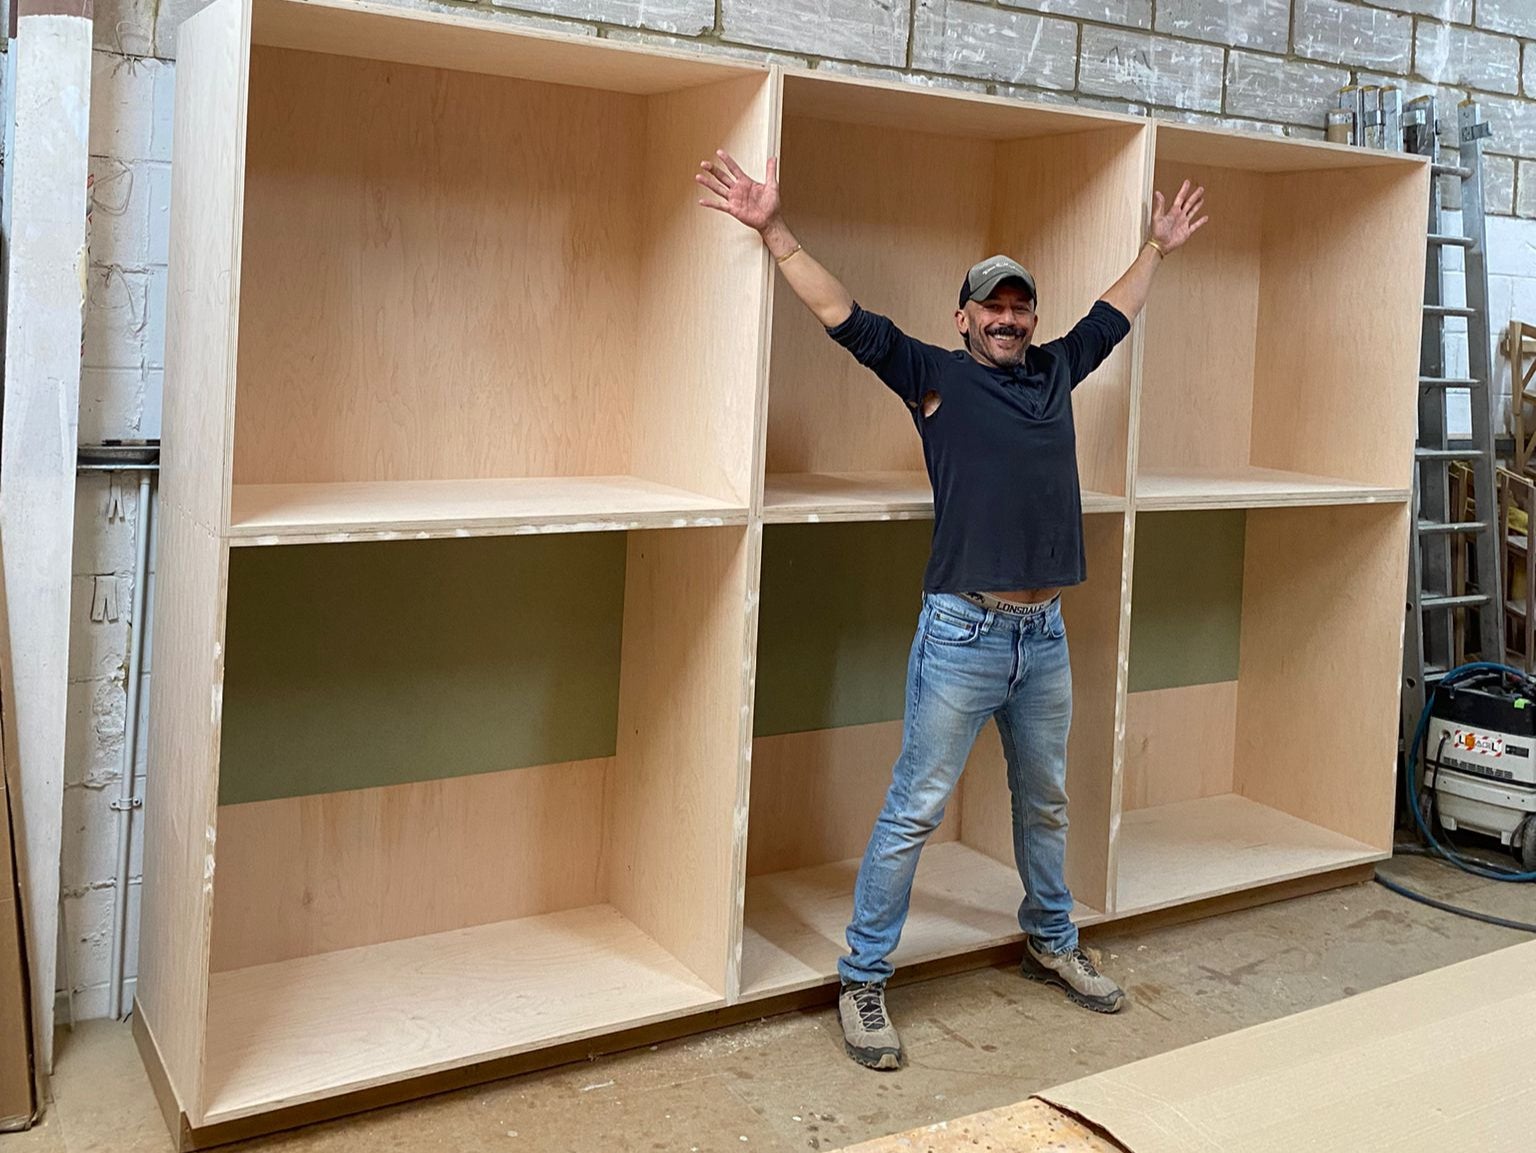 Furniture-maker Brandon Marescia: ‘I knew carpentry was what I wanted to do when I was a teenager’